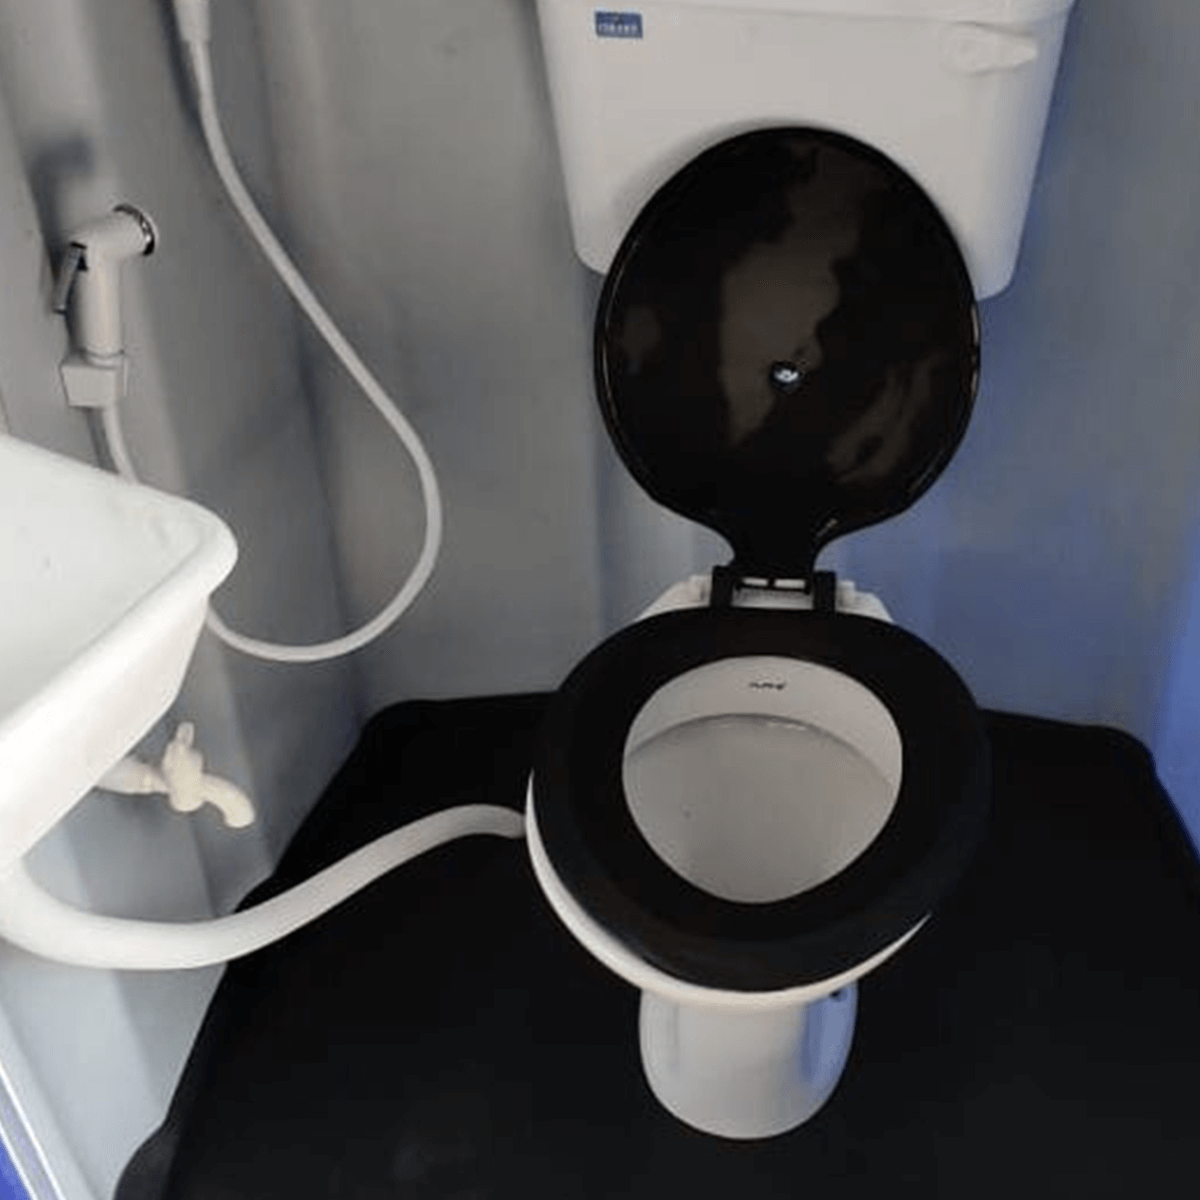 Stack-A-Let Portable Toilet